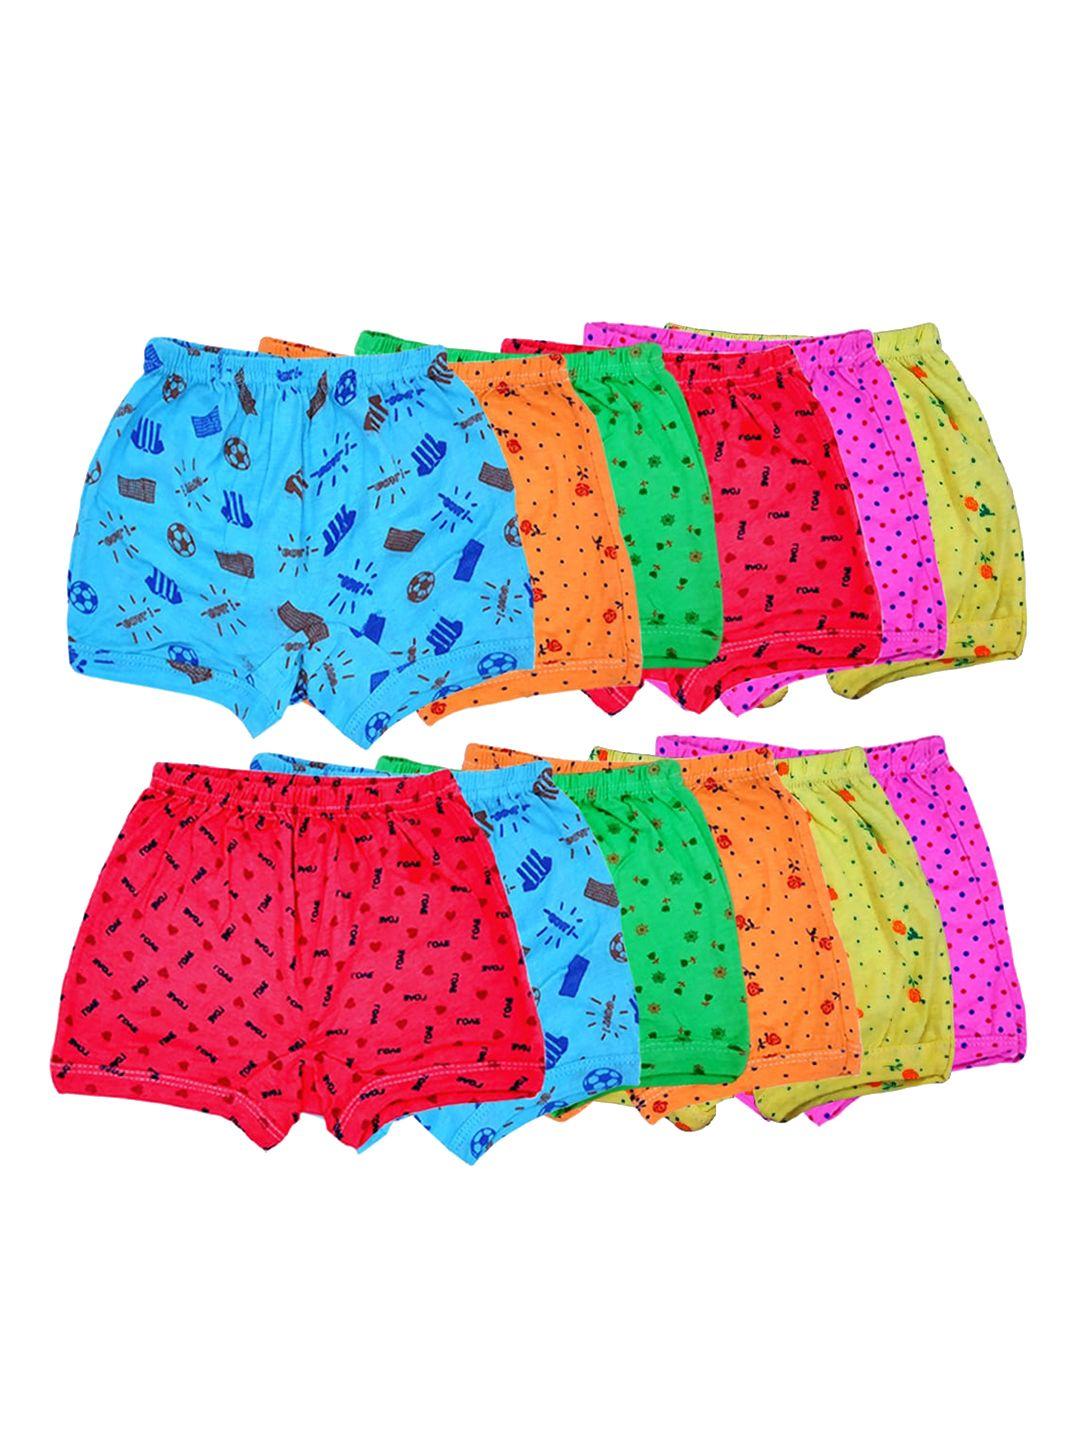 baesd infants pack of 12 printed cotton basic briefs 54_s.a.o_po-12